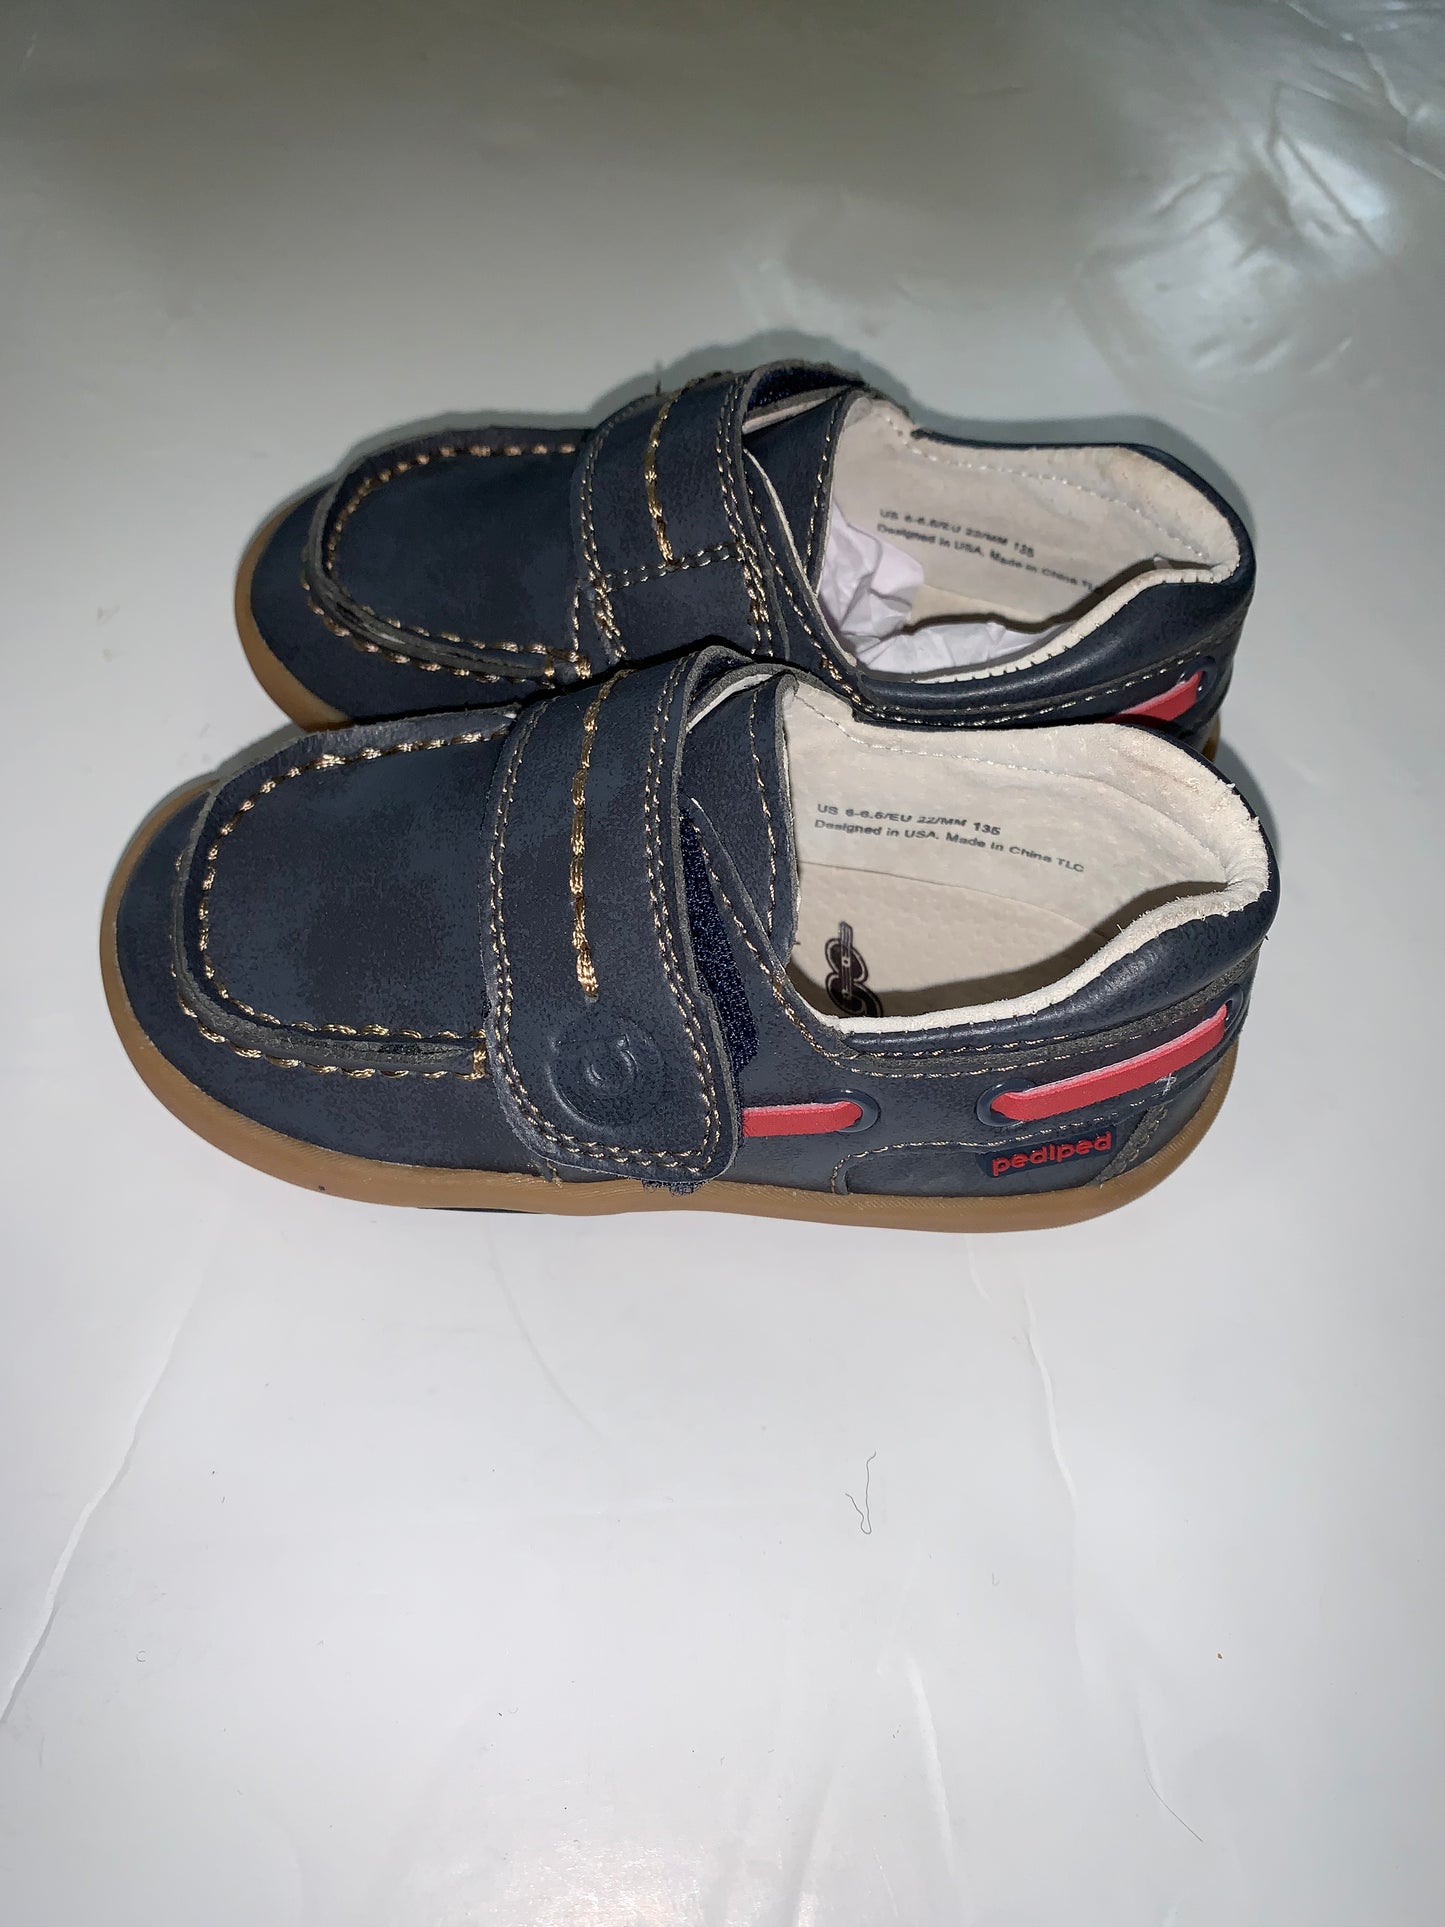 Pediped grip and go bots loafer summer shoe